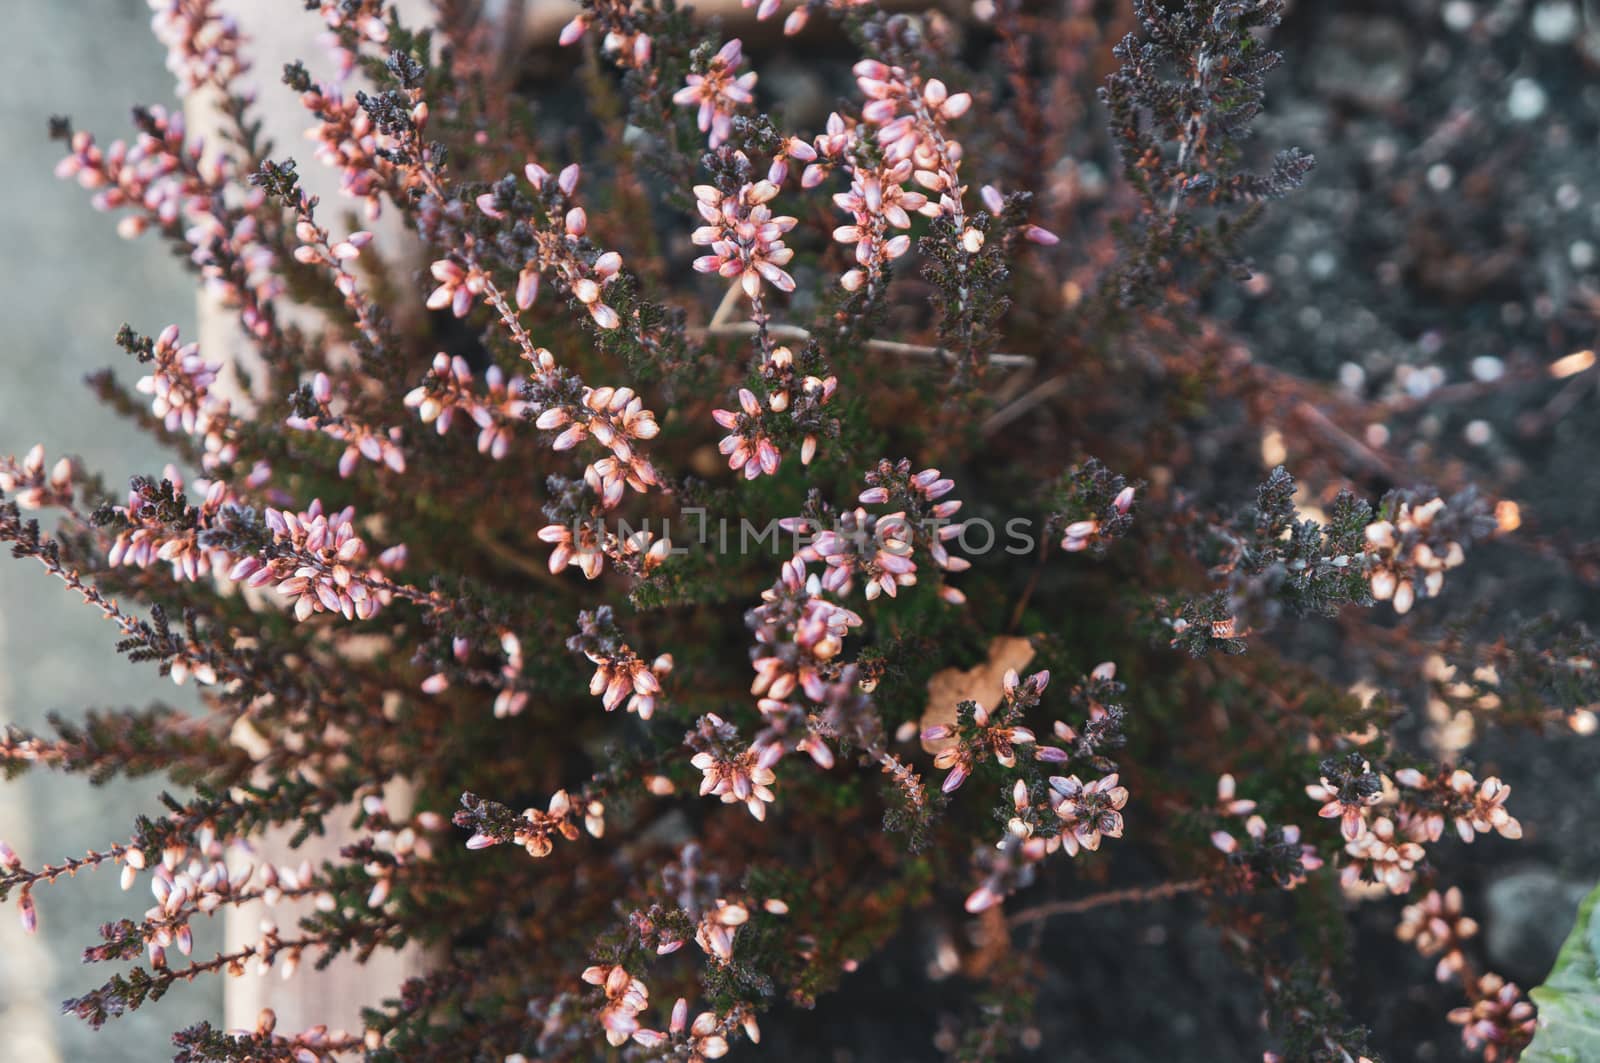 Warm toned macro photo from above of small pink flowers and buds blooming on dark green spiky branches. Romantic and passionate feeling. Shot in daylight.